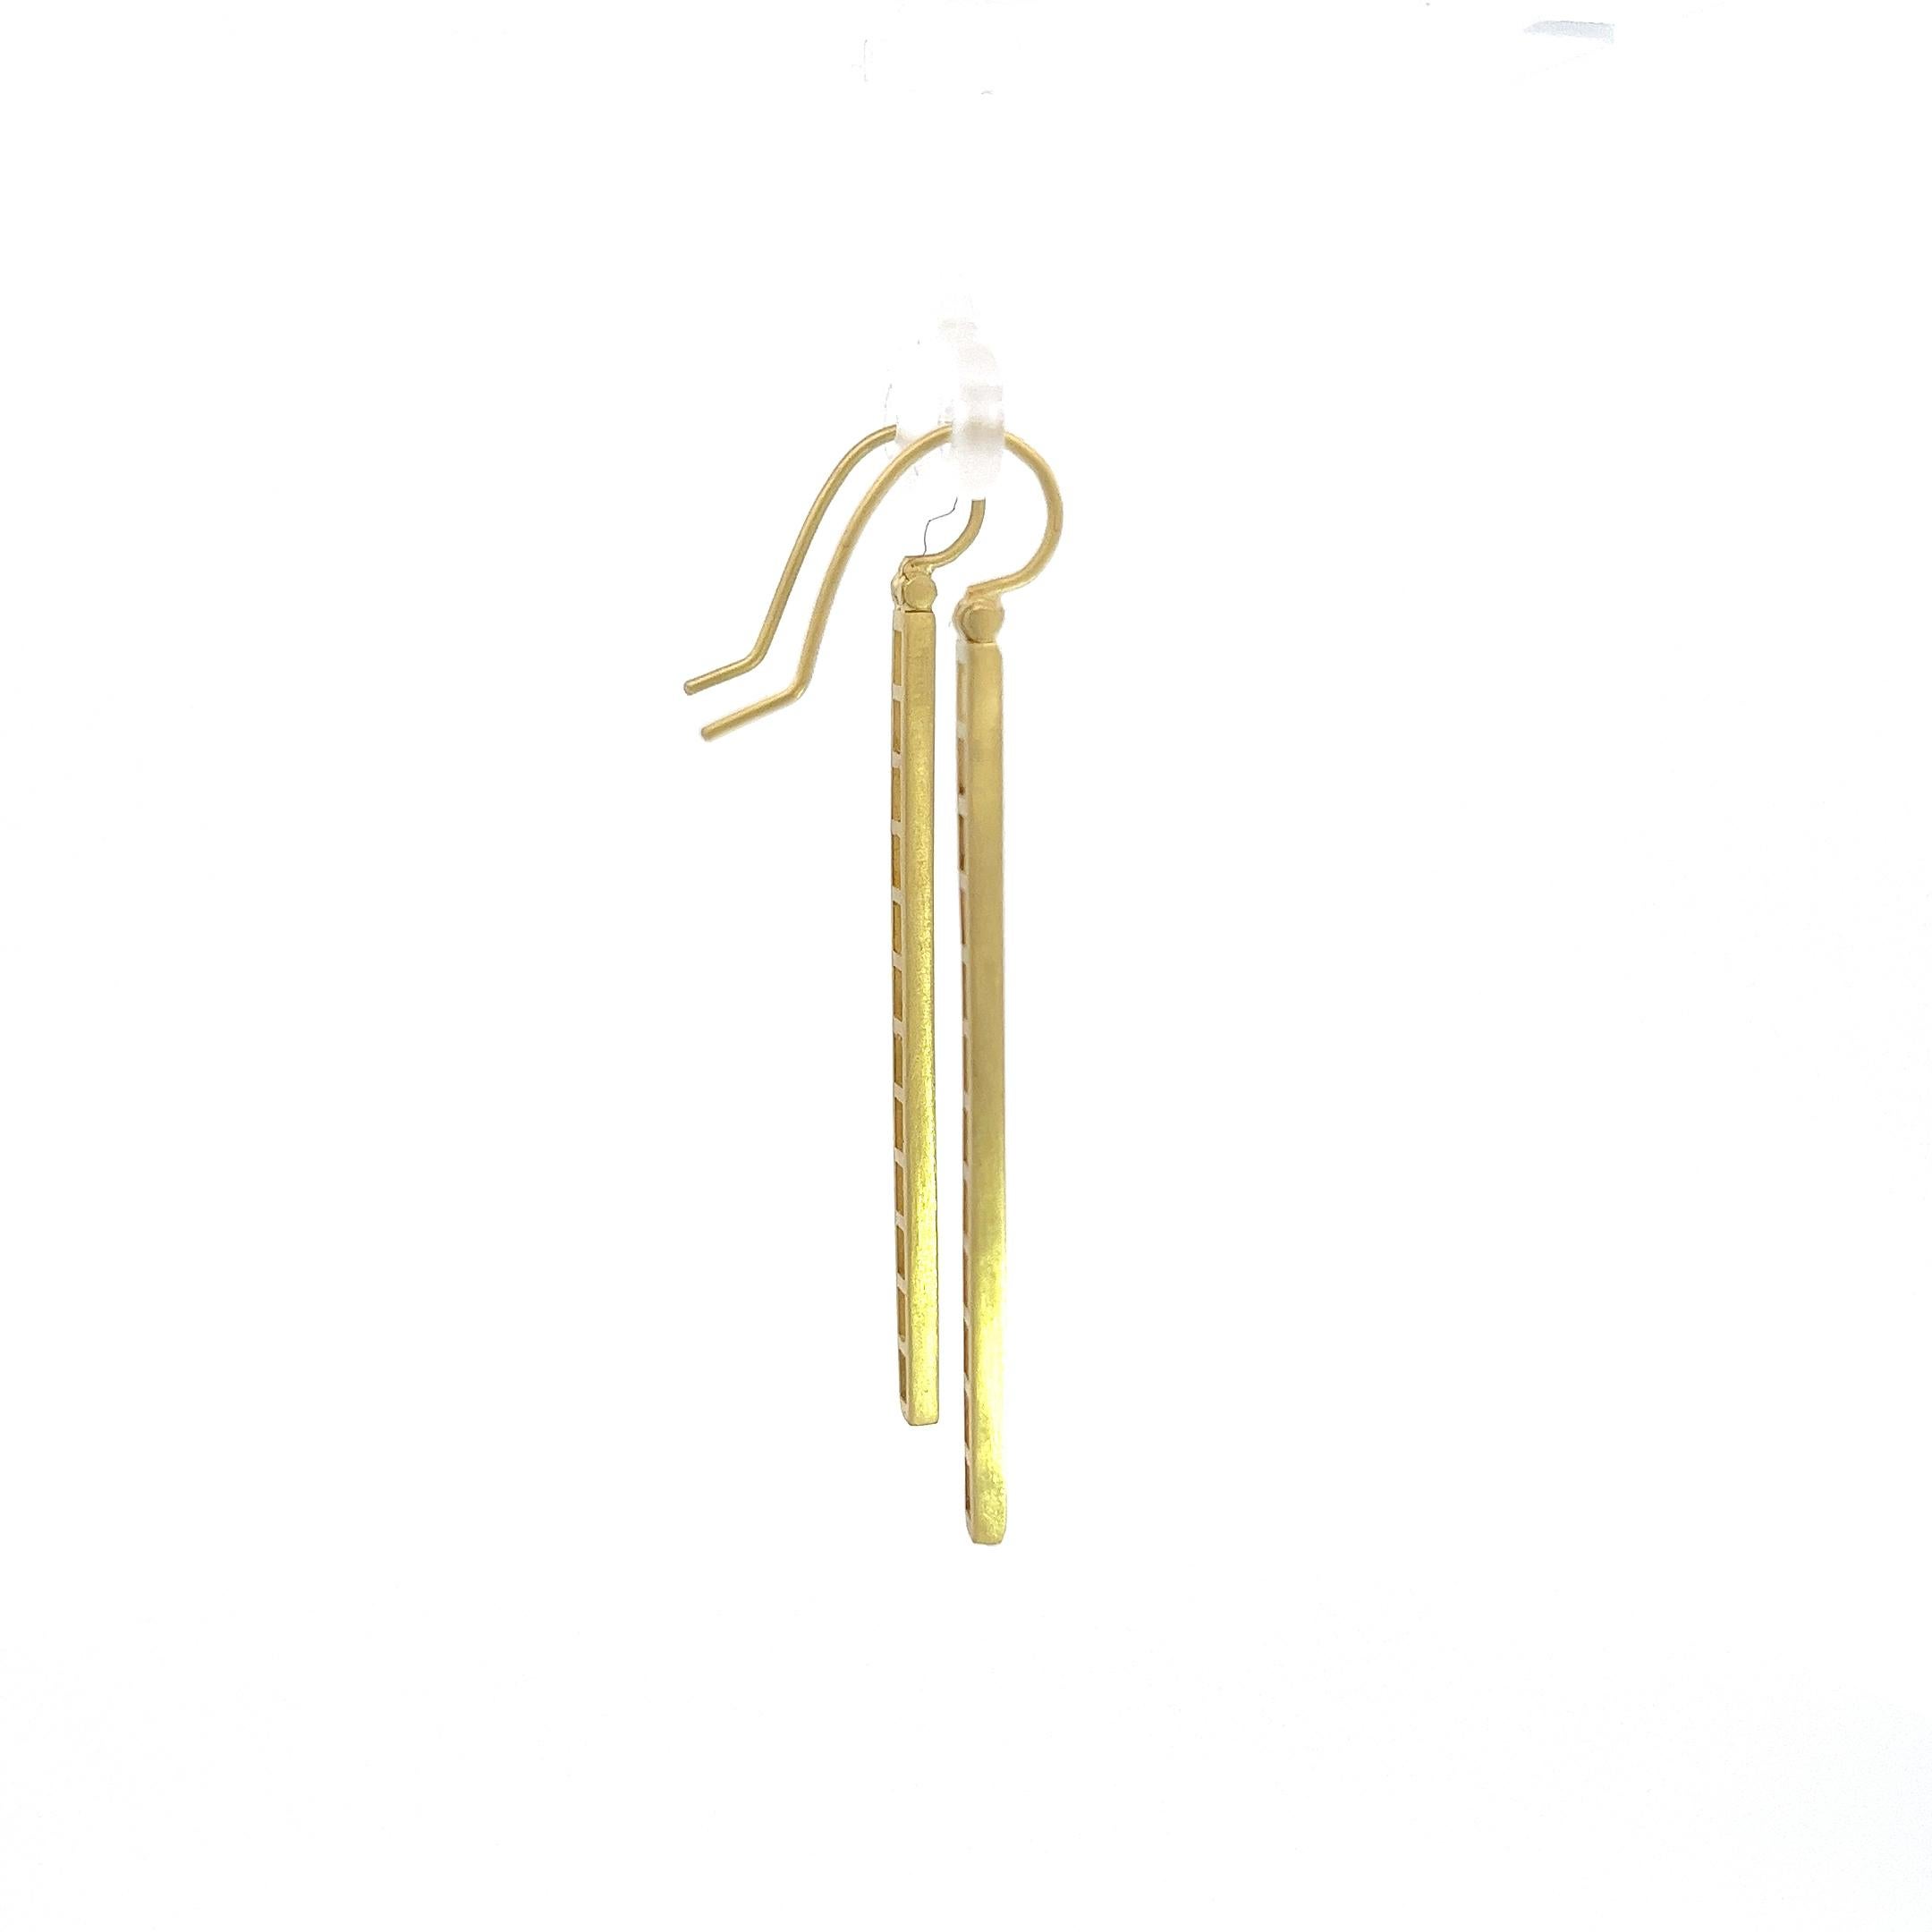 Channel set in 18 karat gold, the diamond baguettes create a sleek, clean line for a chic, contemporary look.
Matte-finished with hinged ear wires for movement. 

Diamonds: E/F, VS Quality 2.68 TCW
Length: 2.17 